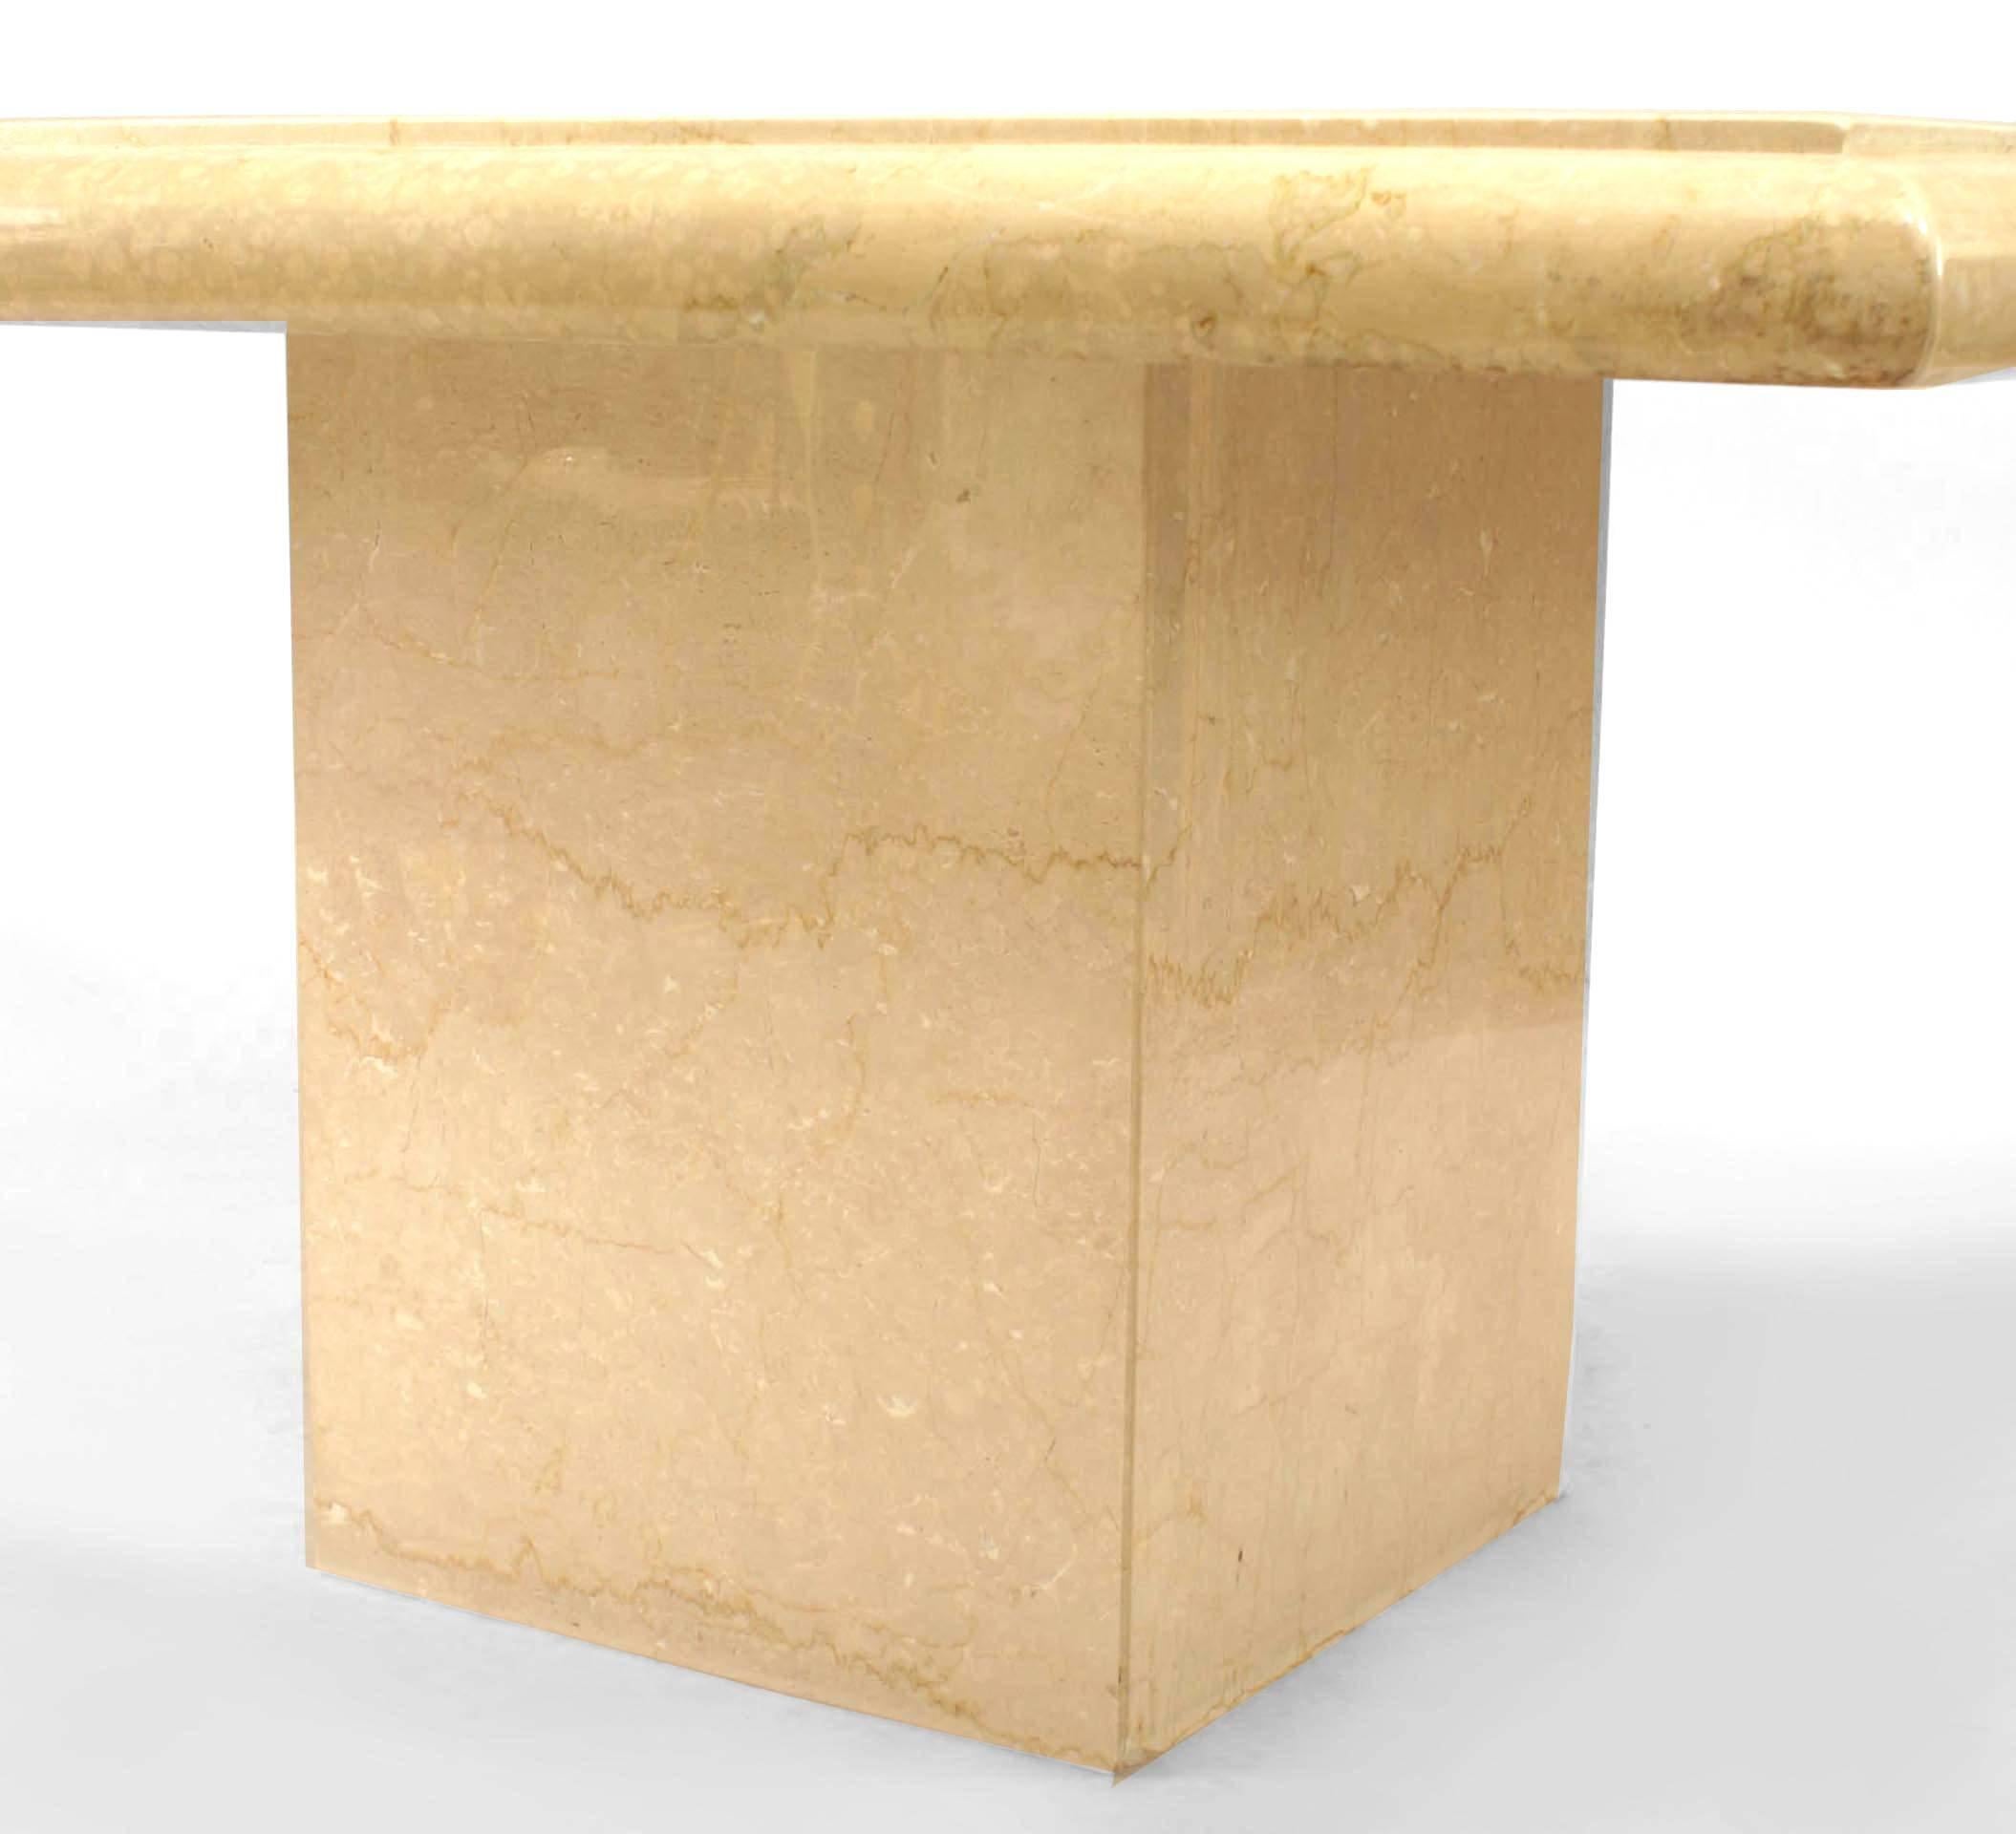 Contemporary polished travertine marble dining table with a square top resting on a square pedestal base.